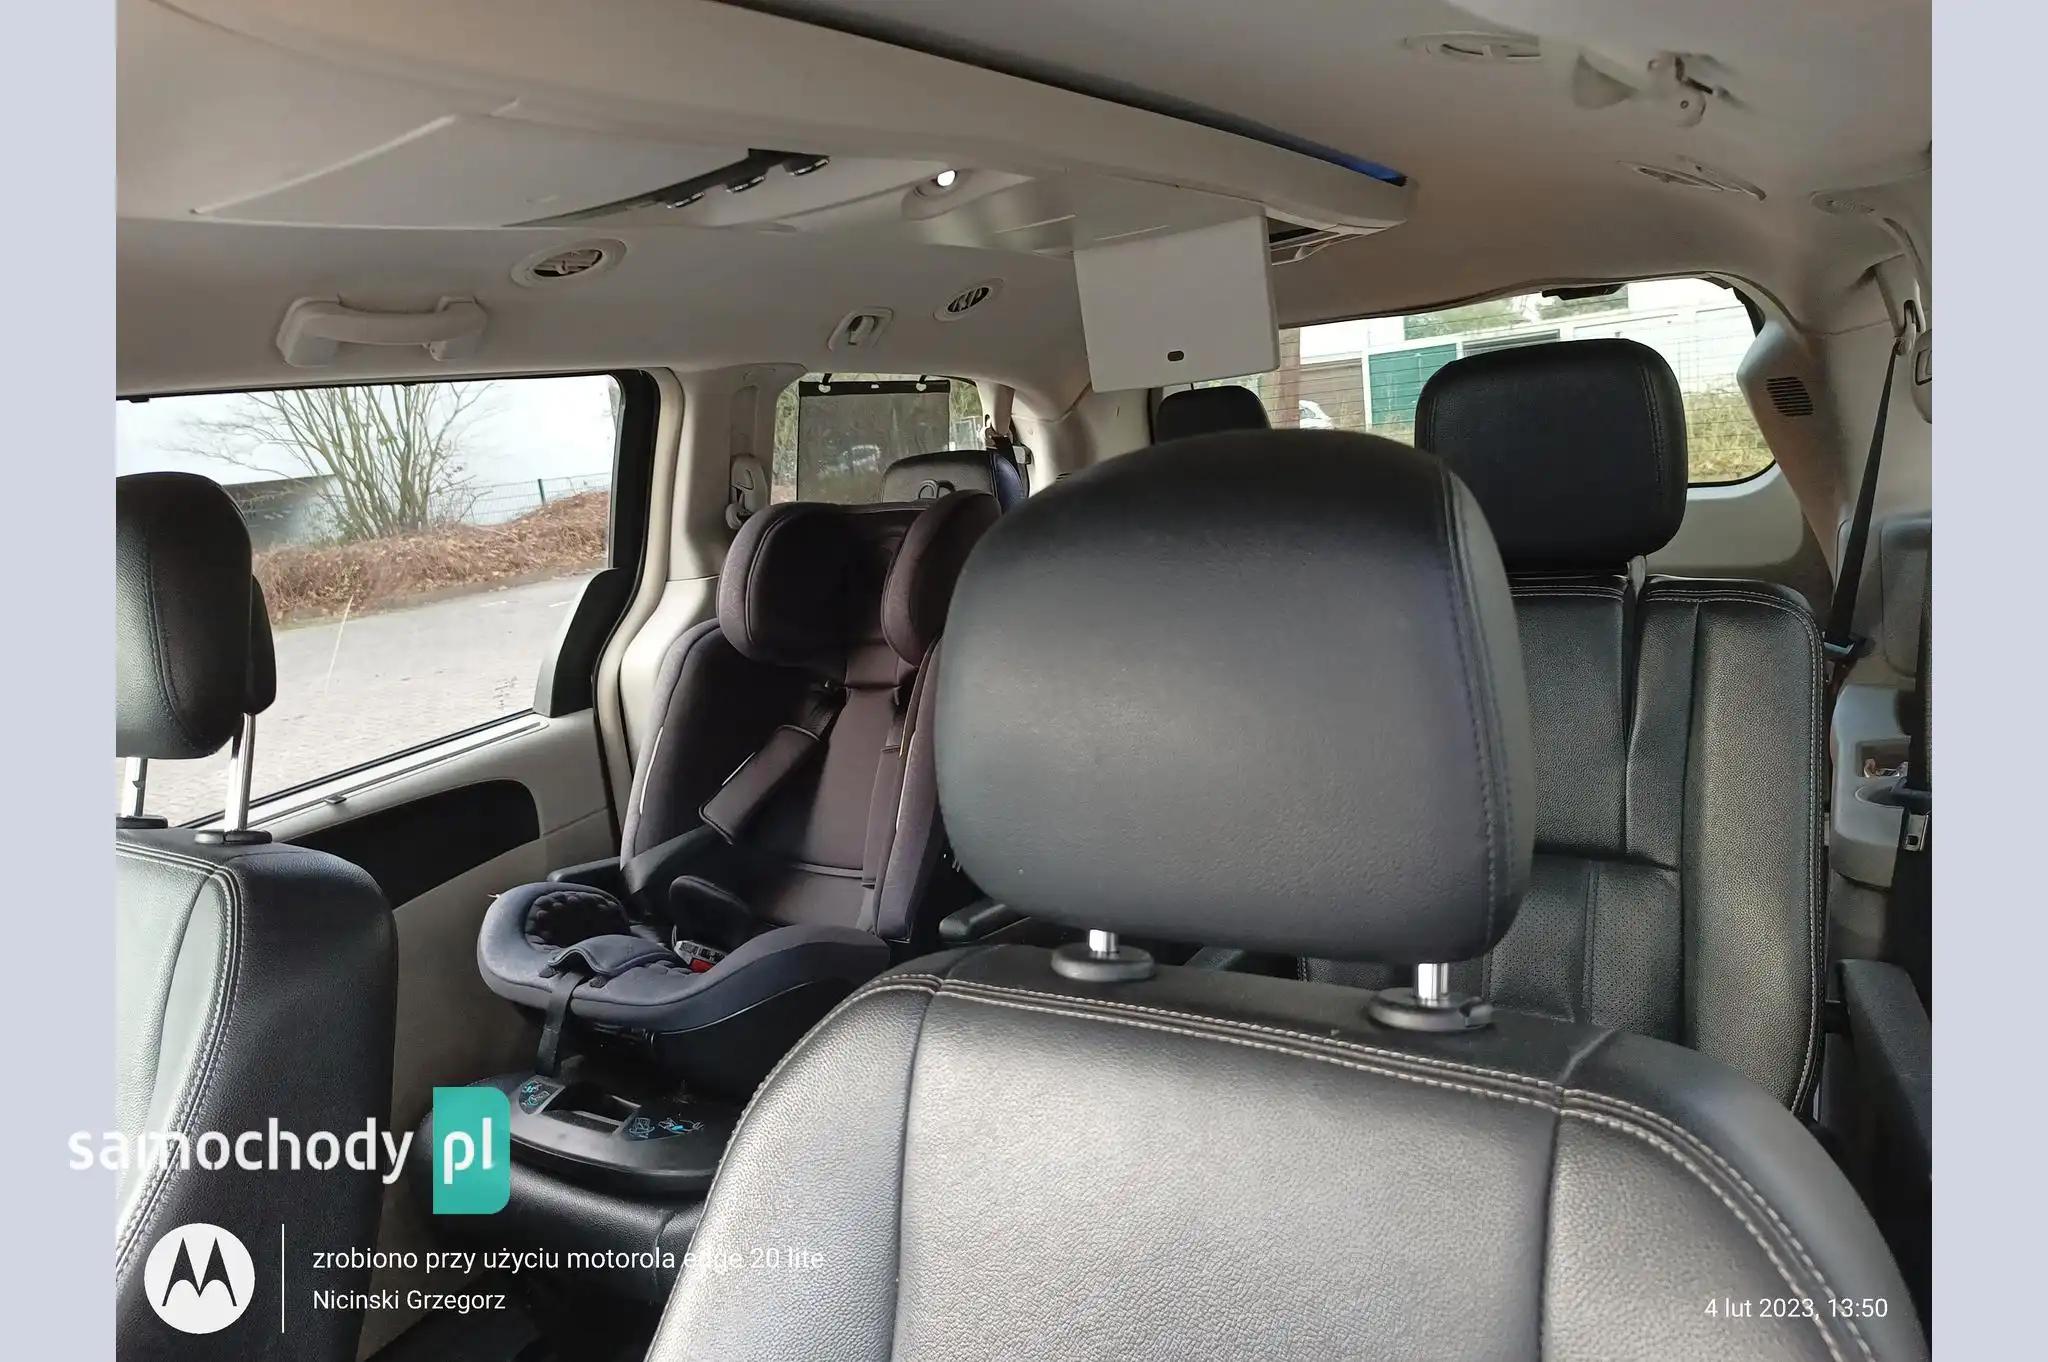 Chrysler Town and Country Minivan 2014